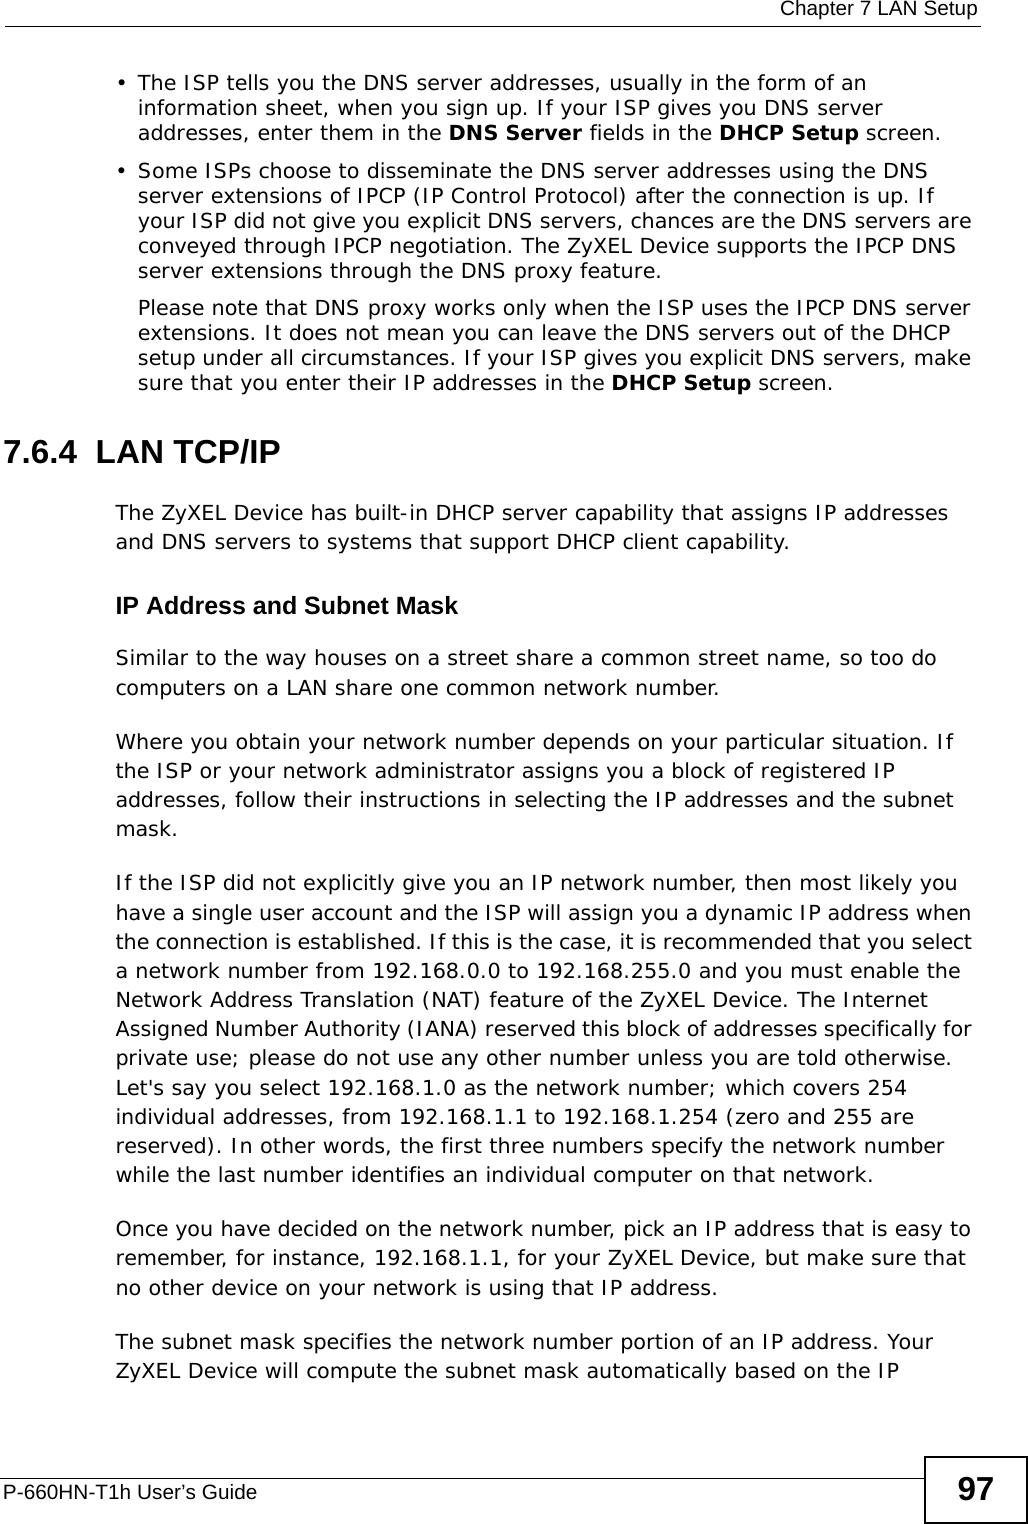  Chapter 7 LAN SetupP-660HN-T1h User’s Guide 97• The ISP tells you the DNS server addresses, usually in the form of an information sheet, when you sign up. If your ISP gives you DNS server addresses, enter them in the DNS Server fields in the DHCP Setup screen.• Some ISPs choose to disseminate the DNS server addresses using the DNS server extensions of IPCP (IP Control Protocol) after the connection is up. If your ISP did not give you explicit DNS servers, chances are the DNS servers are conveyed through IPCP negotiation. The ZyXEL Device supports the IPCP DNS server extensions through the DNS proxy feature.Please note that DNS proxy works only when the ISP uses the IPCP DNS server extensions. It does not mean you can leave the DNS servers out of the DHCP setup under all circumstances. If your ISP gives you explicit DNS servers, make sure that you enter their IP addresses in the DHCP Setup screen.7.6.4  LAN TCP/IP The ZyXEL Device has built-in DHCP server capability that assigns IP addresses and DNS servers to systems that support DHCP client capability.IP Address and Subnet MaskSimilar to the way houses on a street share a common street name, so too do computers on a LAN share one common network number.Where you obtain your network number depends on your particular situation. If the ISP or your network administrator assigns you a block of registered IP addresses, follow their instructions in selecting the IP addresses and the subnet mask.If the ISP did not explicitly give you an IP network number, then most likely you have a single user account and the ISP will assign you a dynamic IP address when the connection is established. If this is the case, it is recommended that you select a network number from 192.168.0.0 to 192.168.255.0 and you must enable the Network Address Translation (NAT) feature of the ZyXEL Device. The Internet Assigned Number Authority (IANA) reserved this block of addresses specifically for private use; please do not use any other number unless you are told otherwise. Let&apos;s say you select 192.168.1.0 as the network number; which covers 254 individual addresses, from 192.168.1.1 to 192.168.1.254 (zero and 255 are reserved). In other words, the first three numbers specify the network number while the last number identifies an individual computer on that network.Once you have decided on the network number, pick an IP address that is easy to remember, for instance, 192.168.1.1, for your ZyXEL Device, but make sure that no other device on your network is using that IP address.The subnet mask specifies the network number portion of an IP address. Your ZyXEL Device will compute the subnet mask automatically based on the IP 